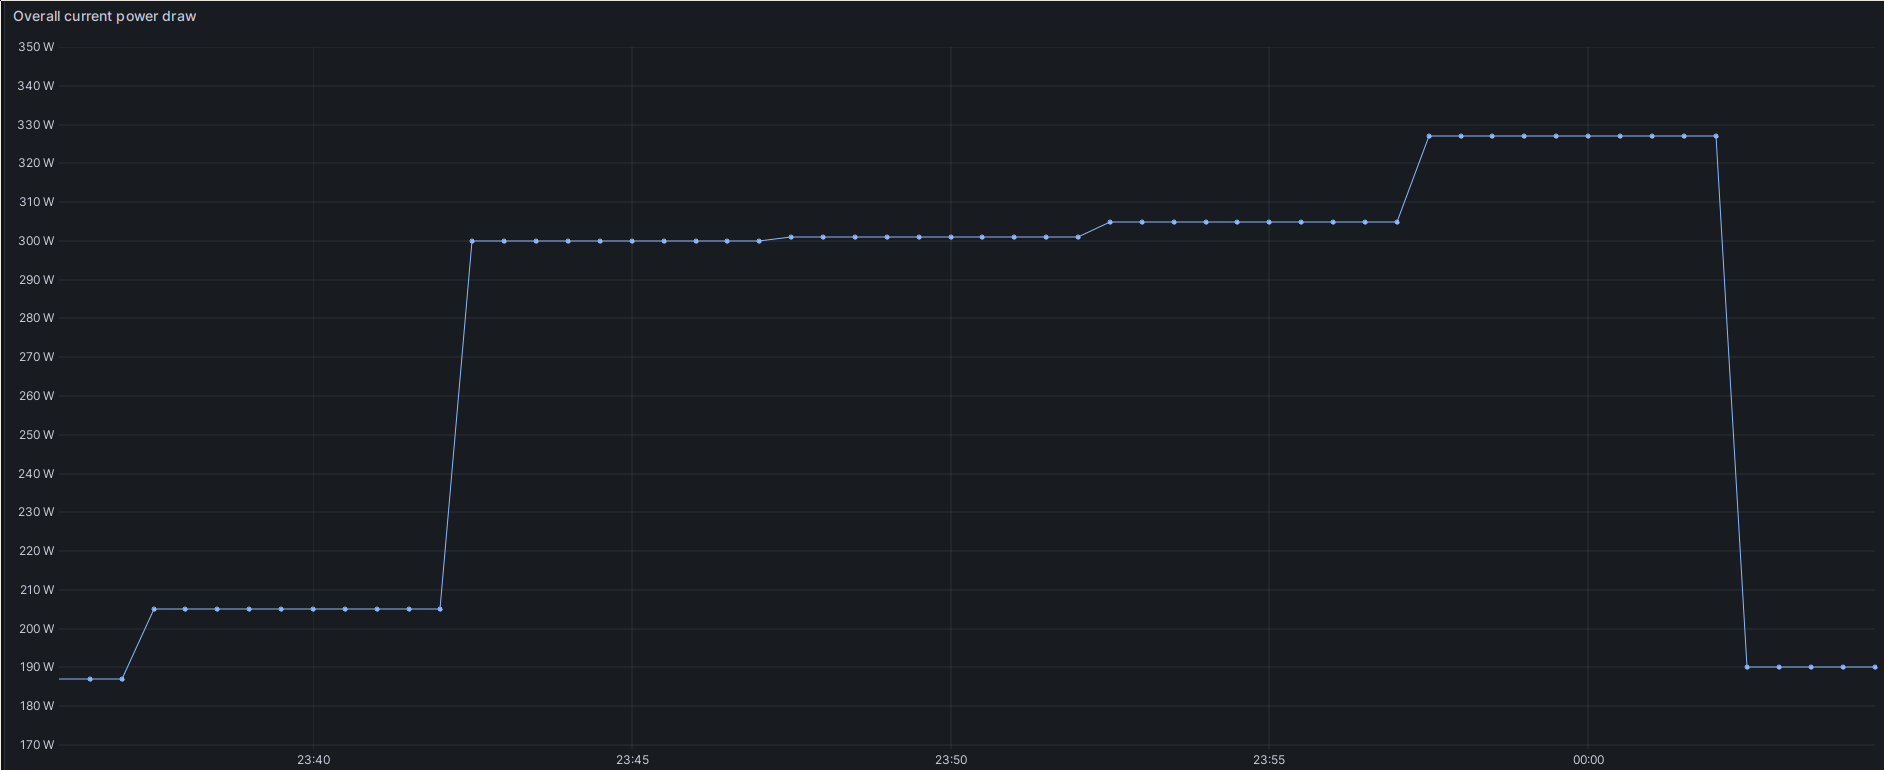 A screenshot of a Grafana visualization. On the x axis is time, and on the y axis is power usage in Watts. At the beginning and end of the graph, the consumption is around 190W. In the middle, it suddenly first goes up to about 300W and then, 12 minutes later, reaches the peak of almost 330W before going down to 190W again.